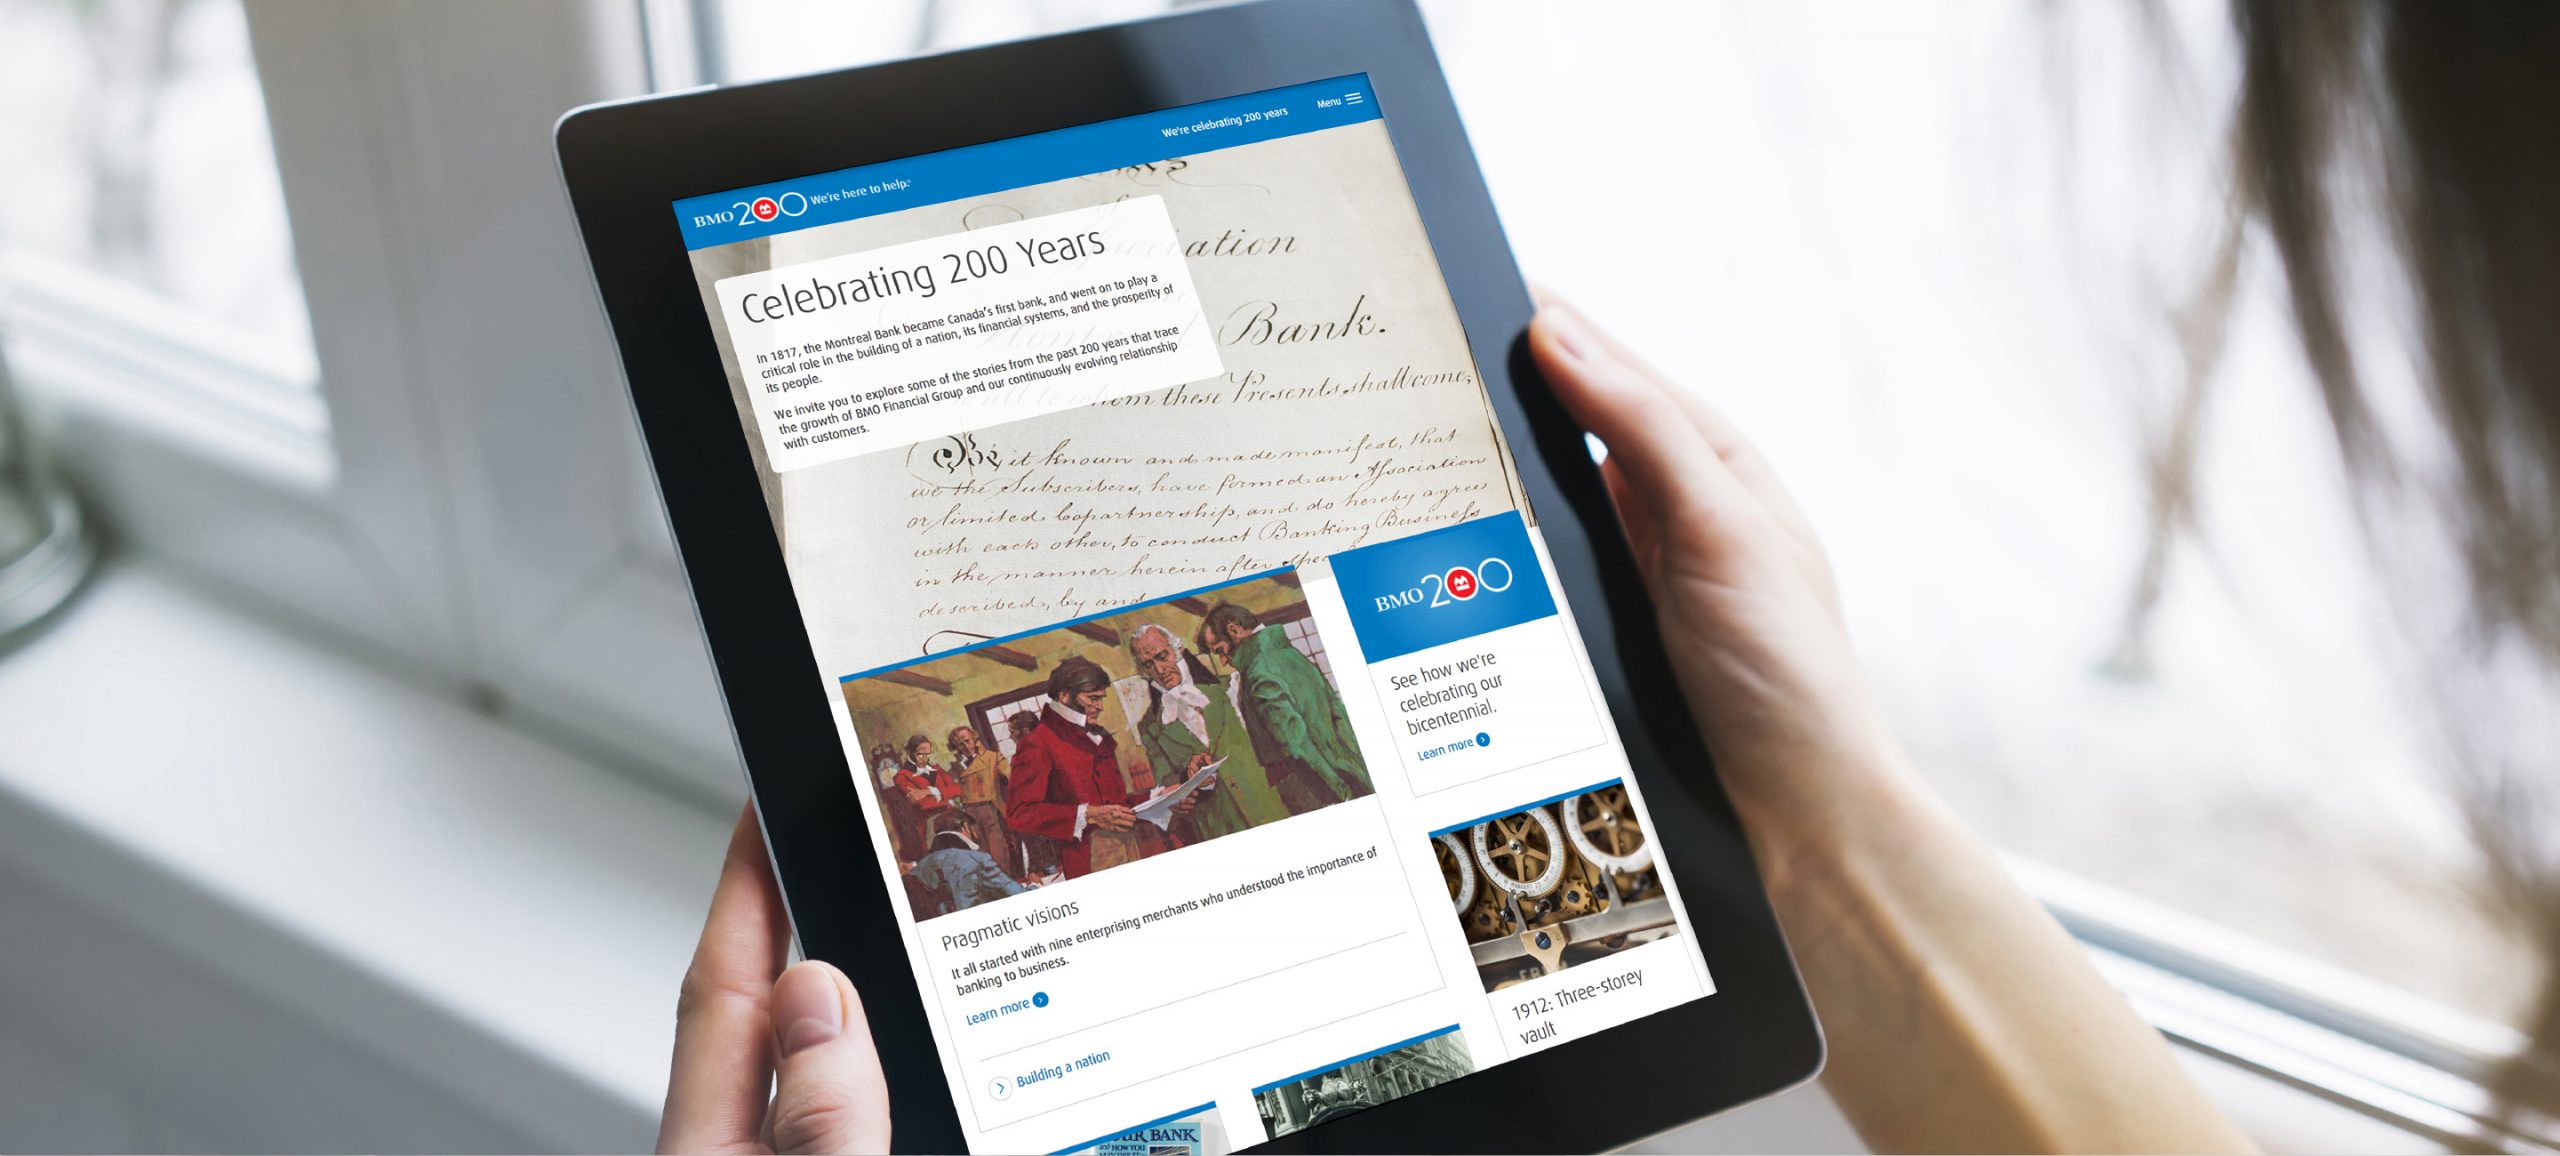 The BMO history website is shown being viewed by a woman using a tablet device.